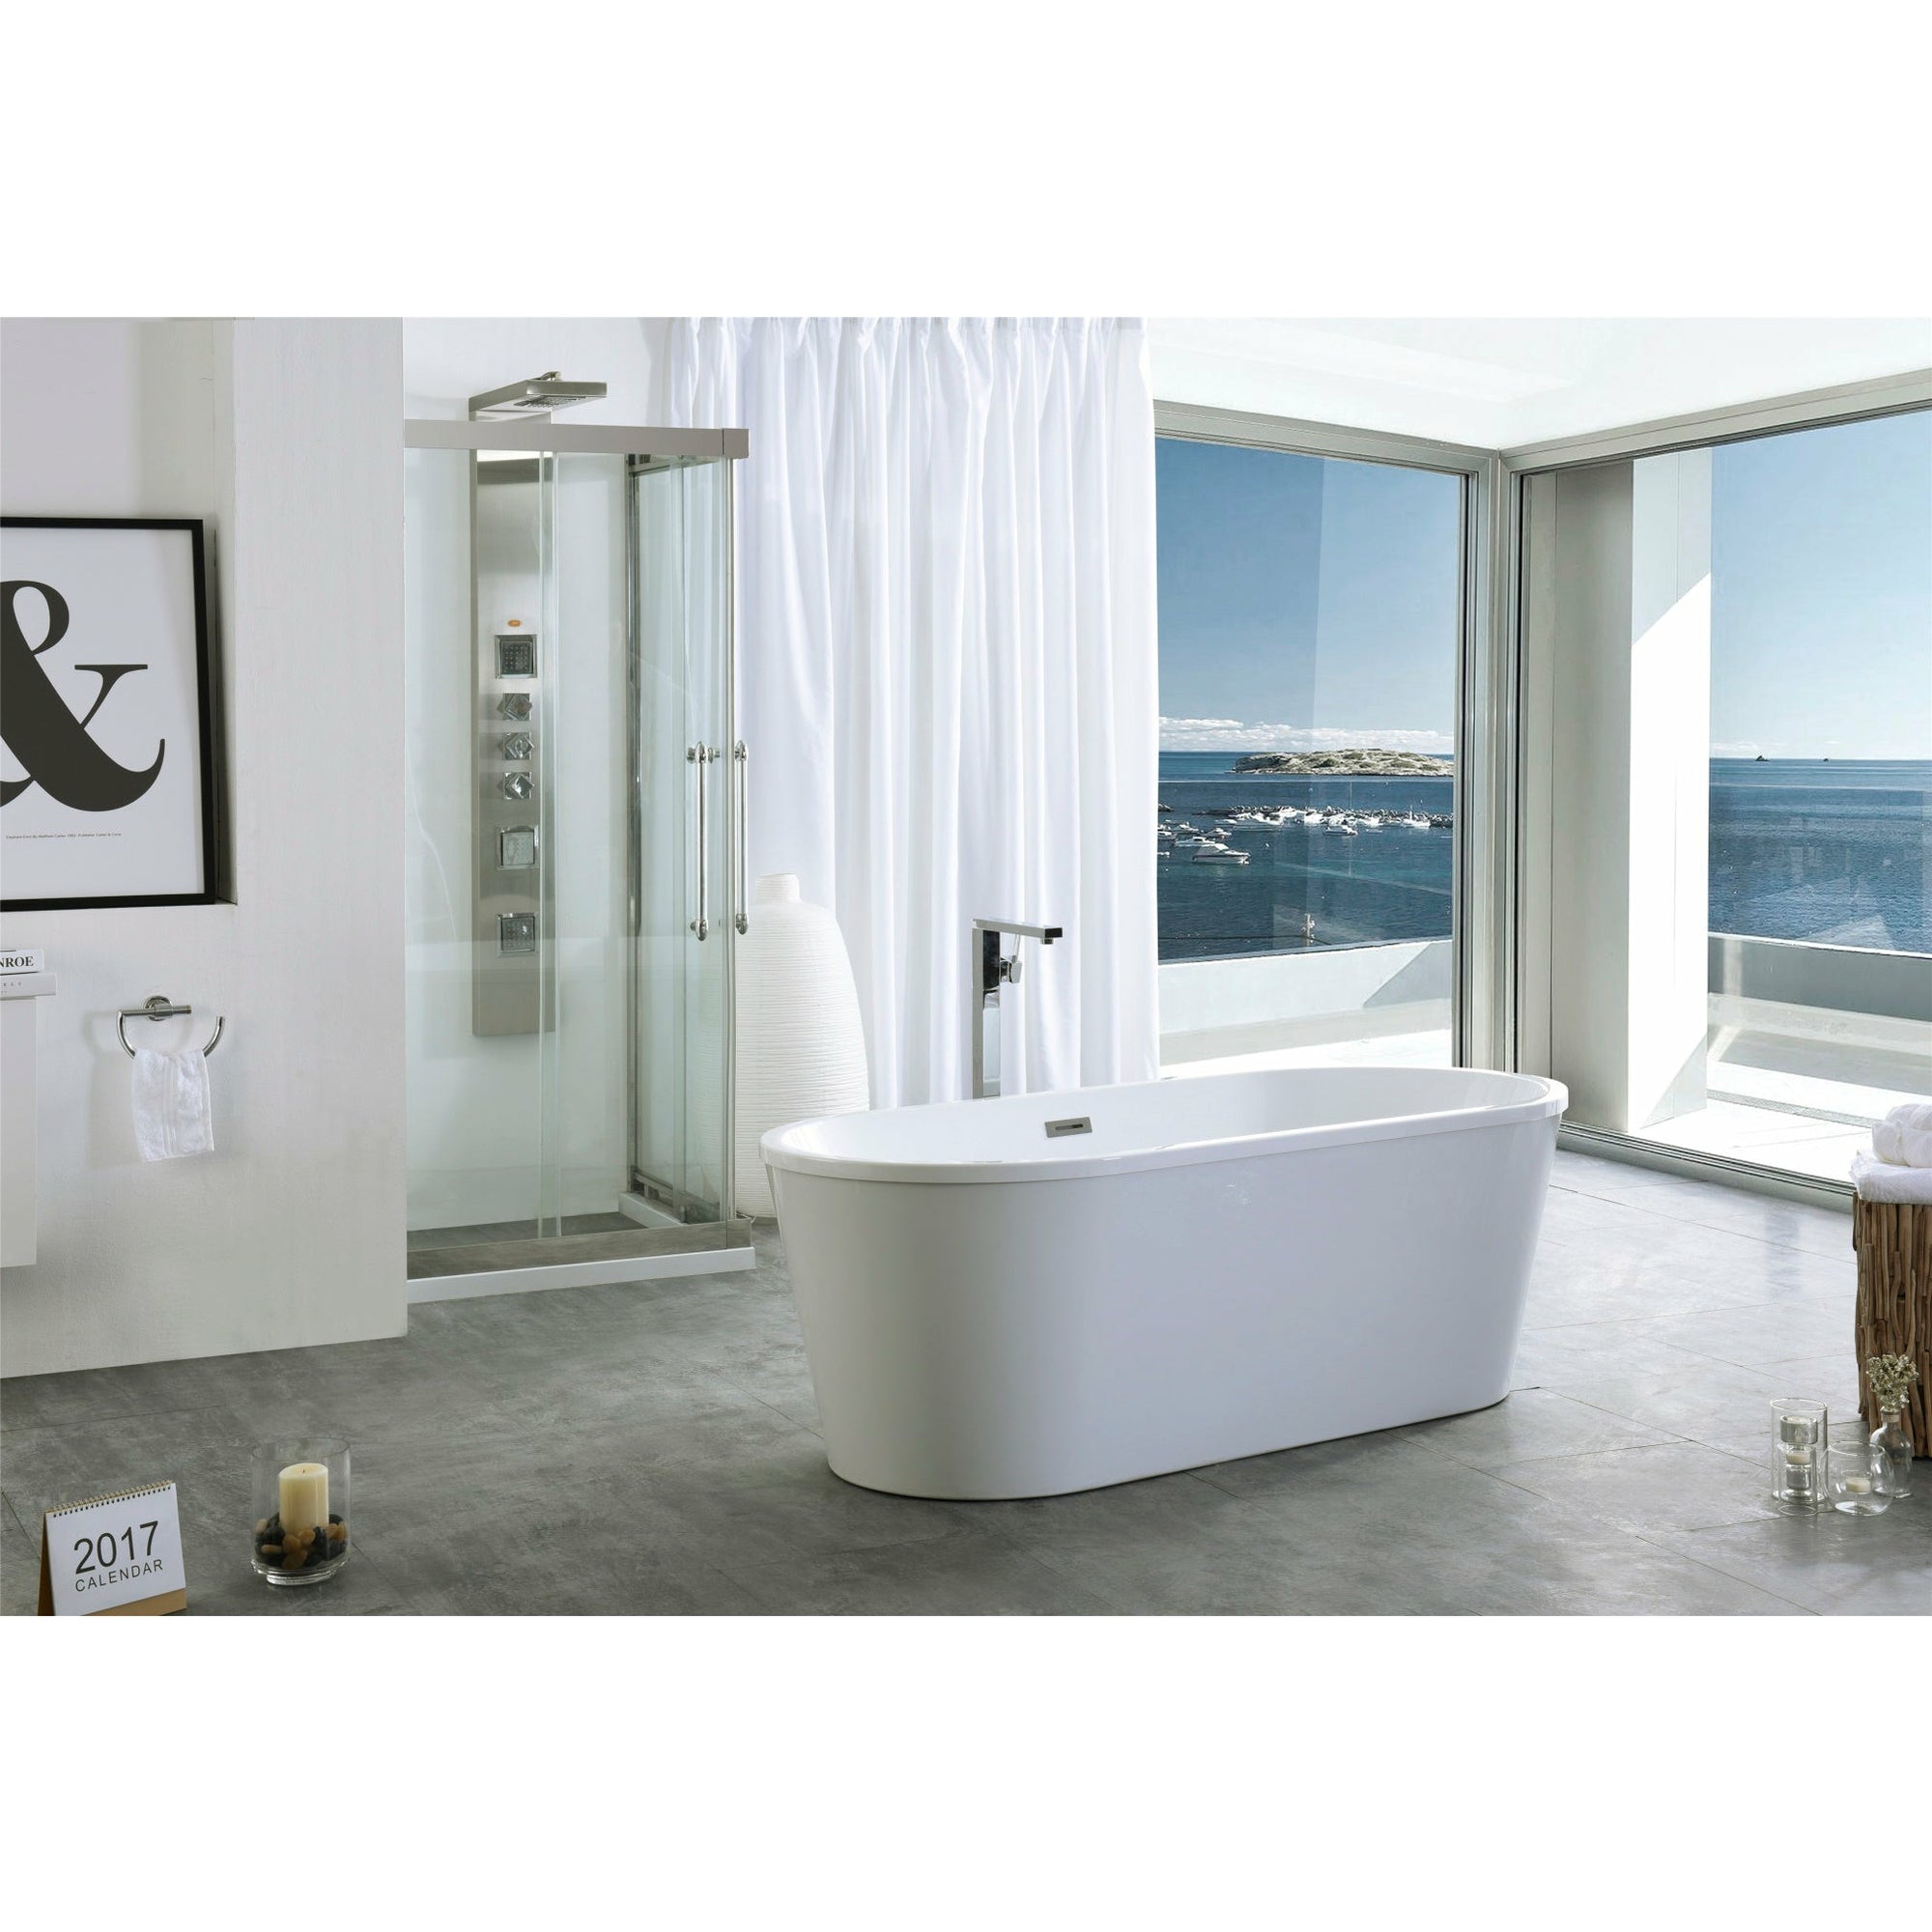 Legion Furniture 59" White Double Ended Freestanding Soaking Bathtub - Soft curves - Acrylic - With Overflow - Faucet sold separately - Lifestyle setting - Front view - WE6815-S - Vital Hydrotherapy